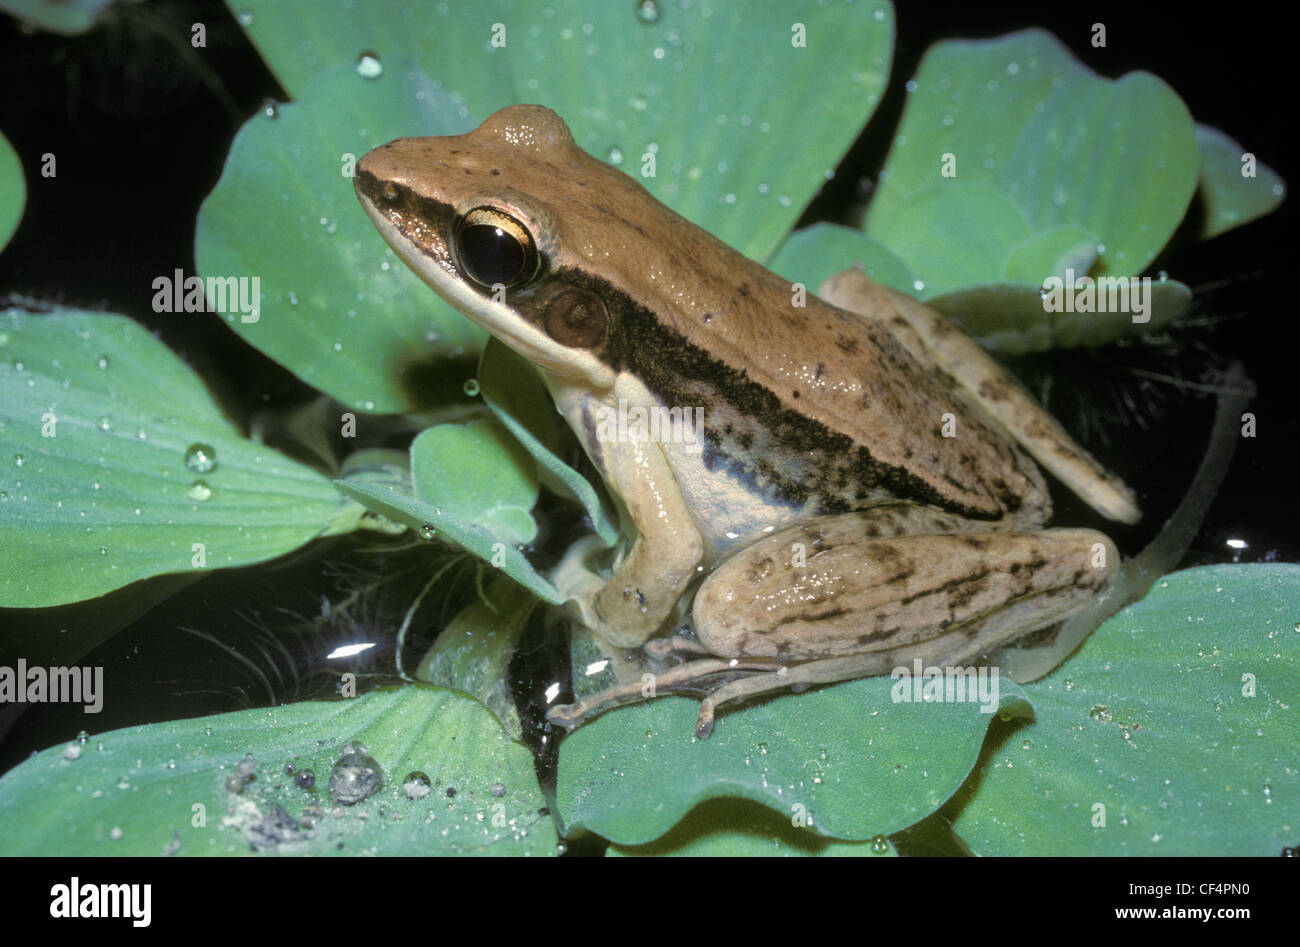 Green paddy frog, red-eared frog or leaf frog (Hylarana (Rana) erythraea: Ranidae) at night in rainforest, Thailand Stock Photo